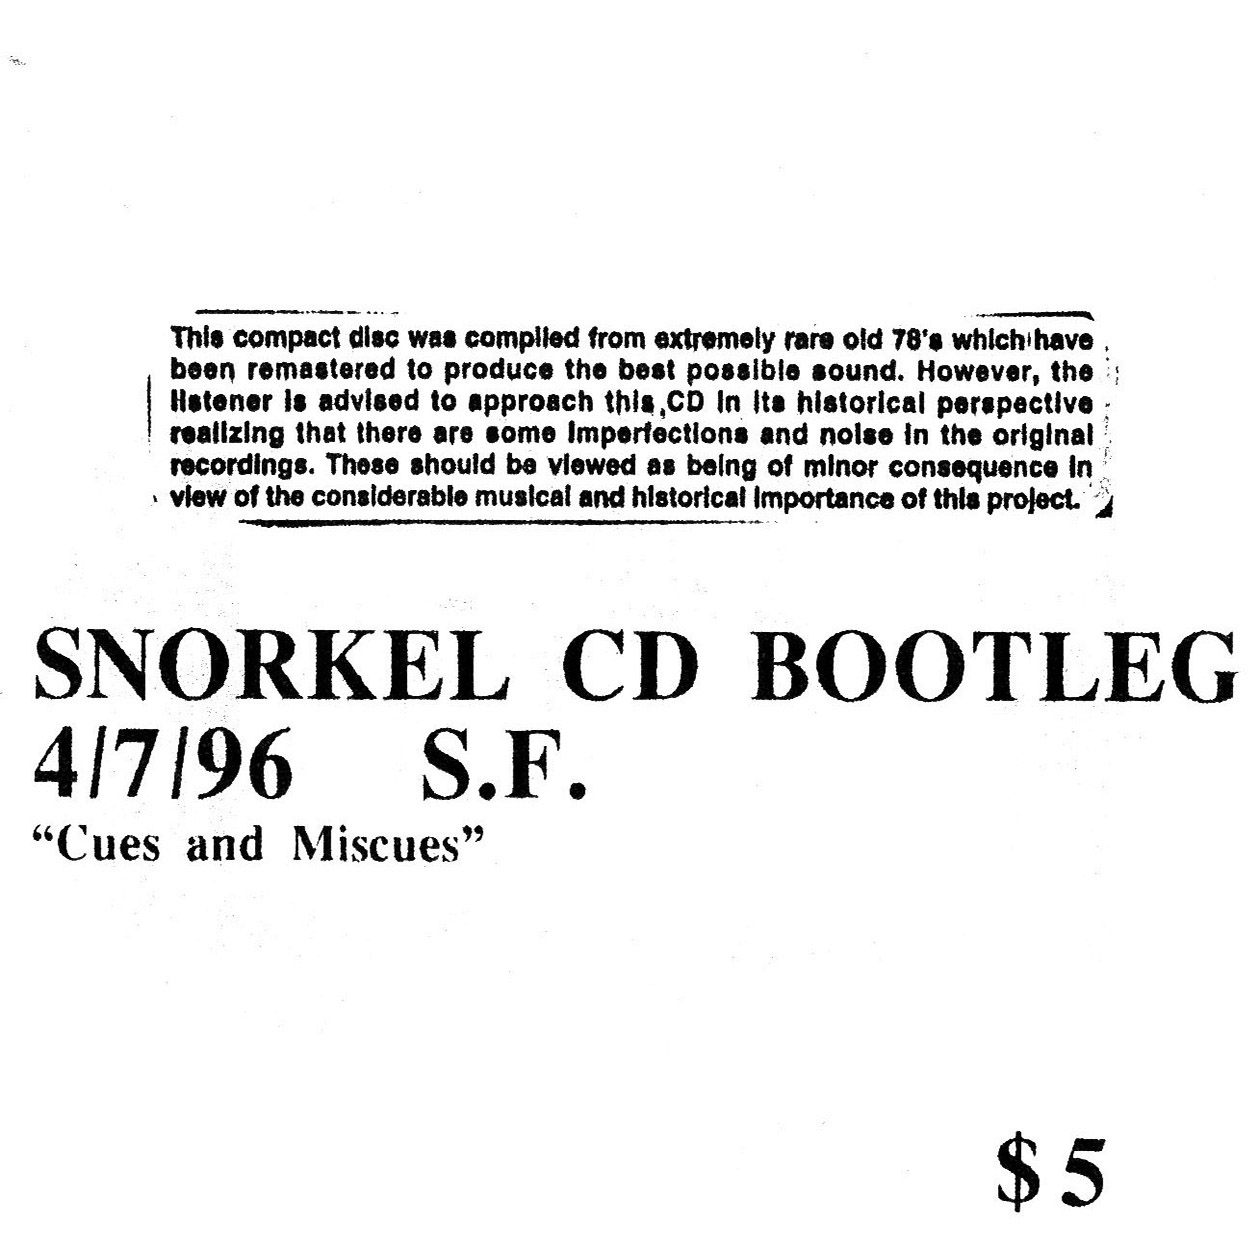 Snorkel – Bootleg 4/7/96 S.F. “Cues and Miscues”